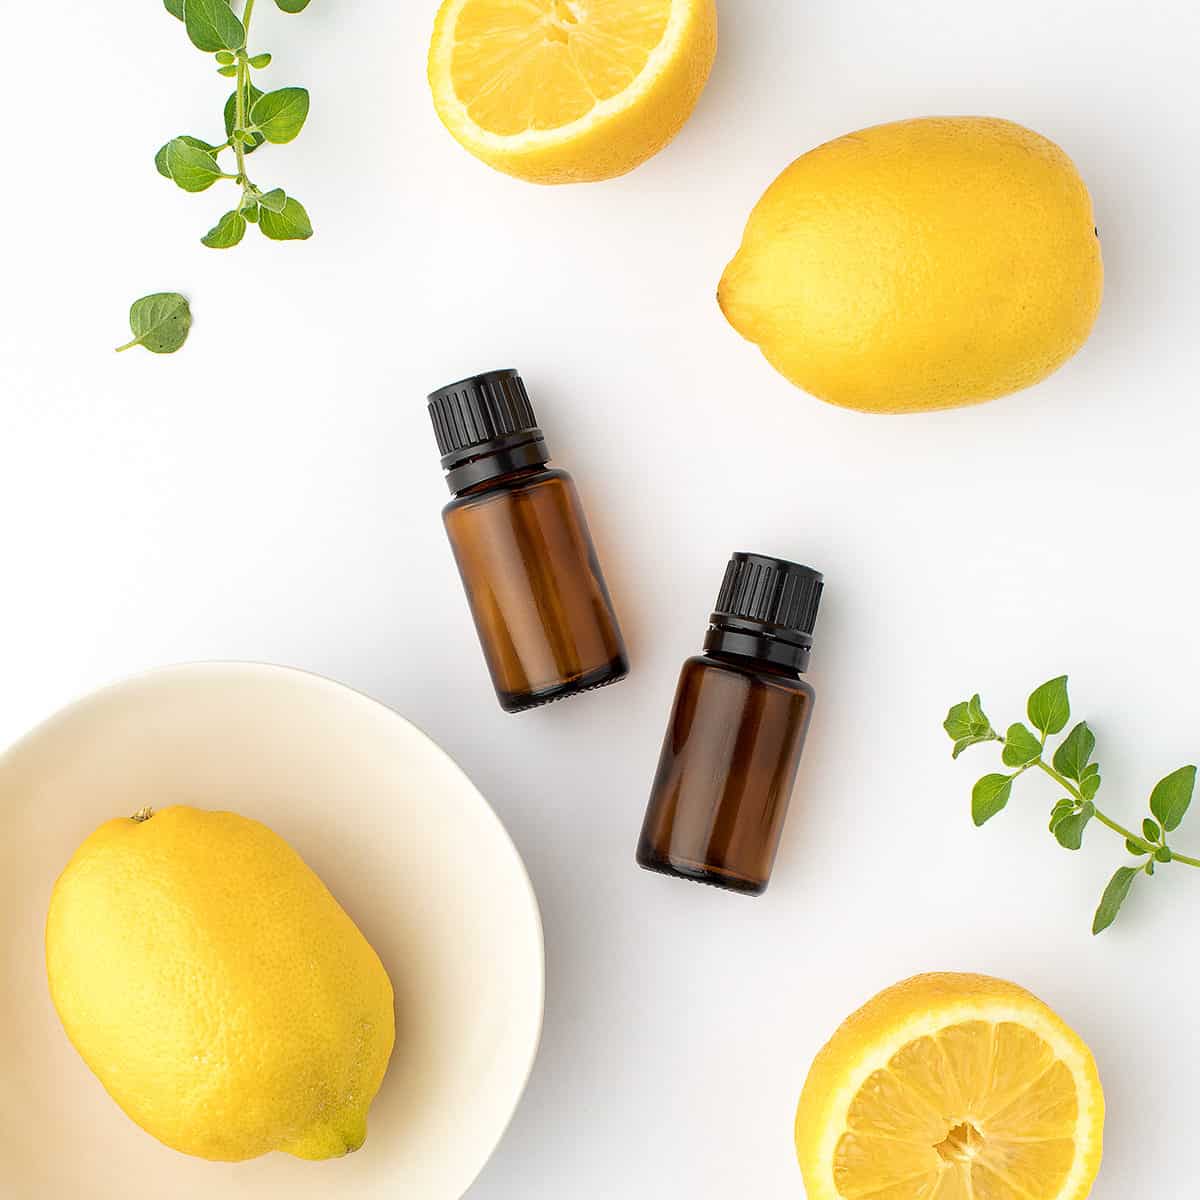 herbs and lemons on a countertop with amber colored essential oil bottles.